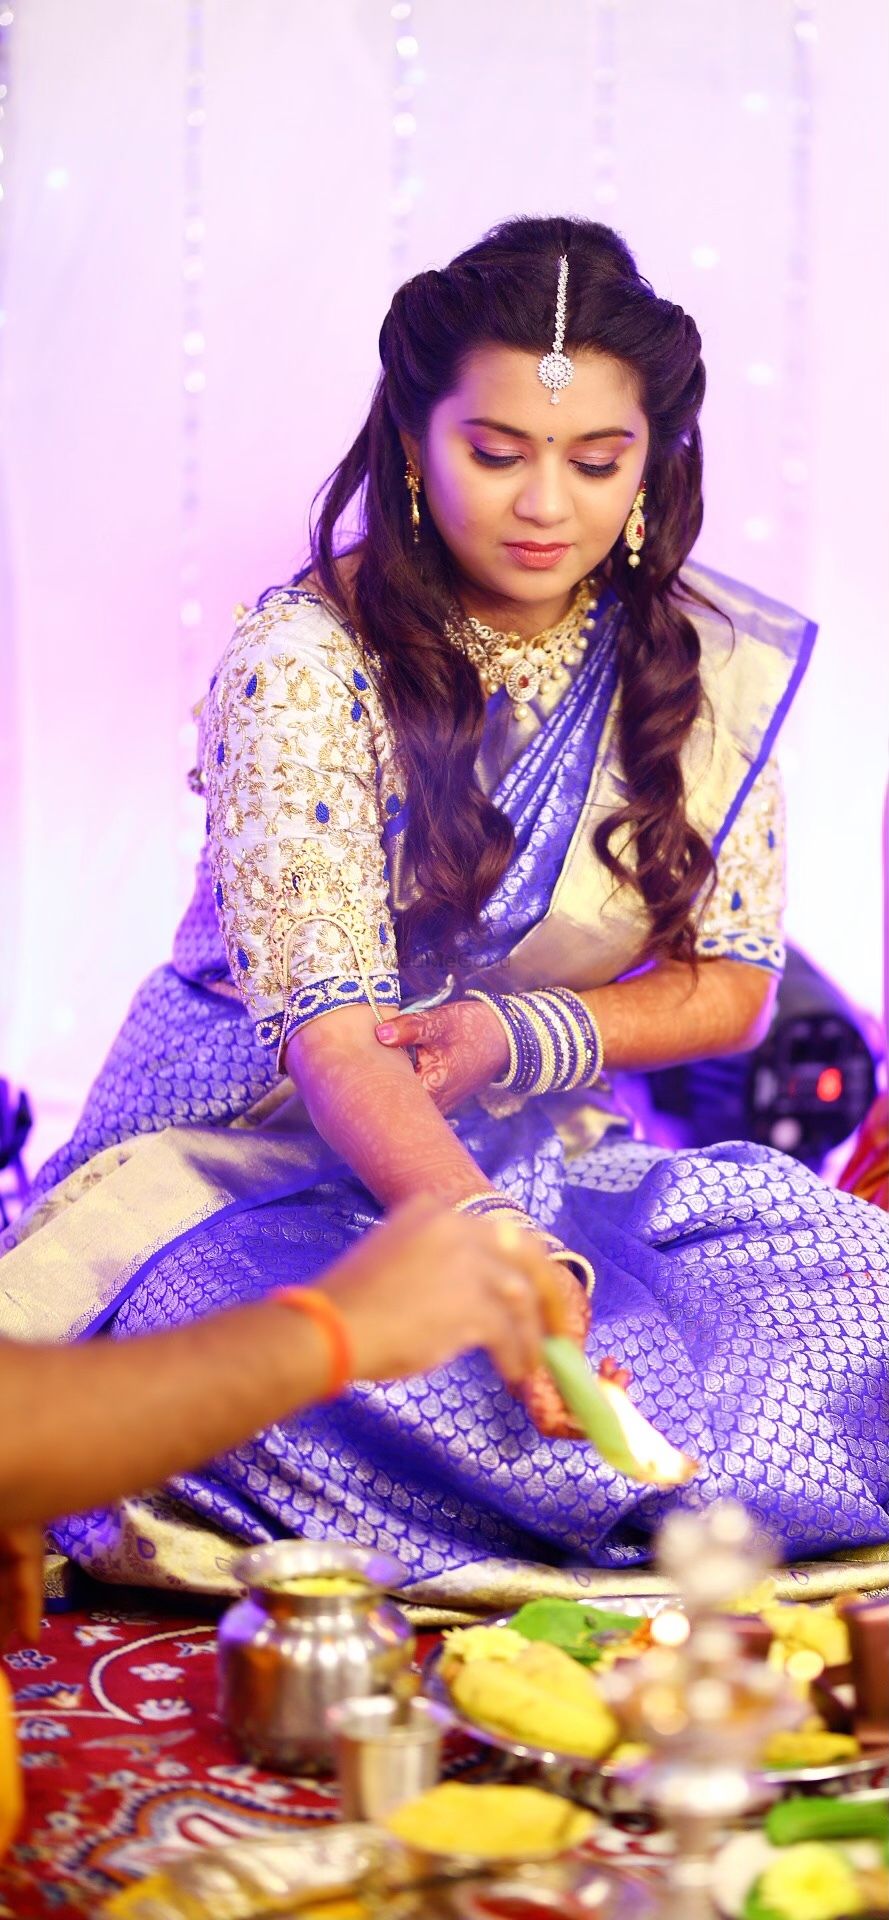 Photo From Engagement makeup - By Makeover by Sonal